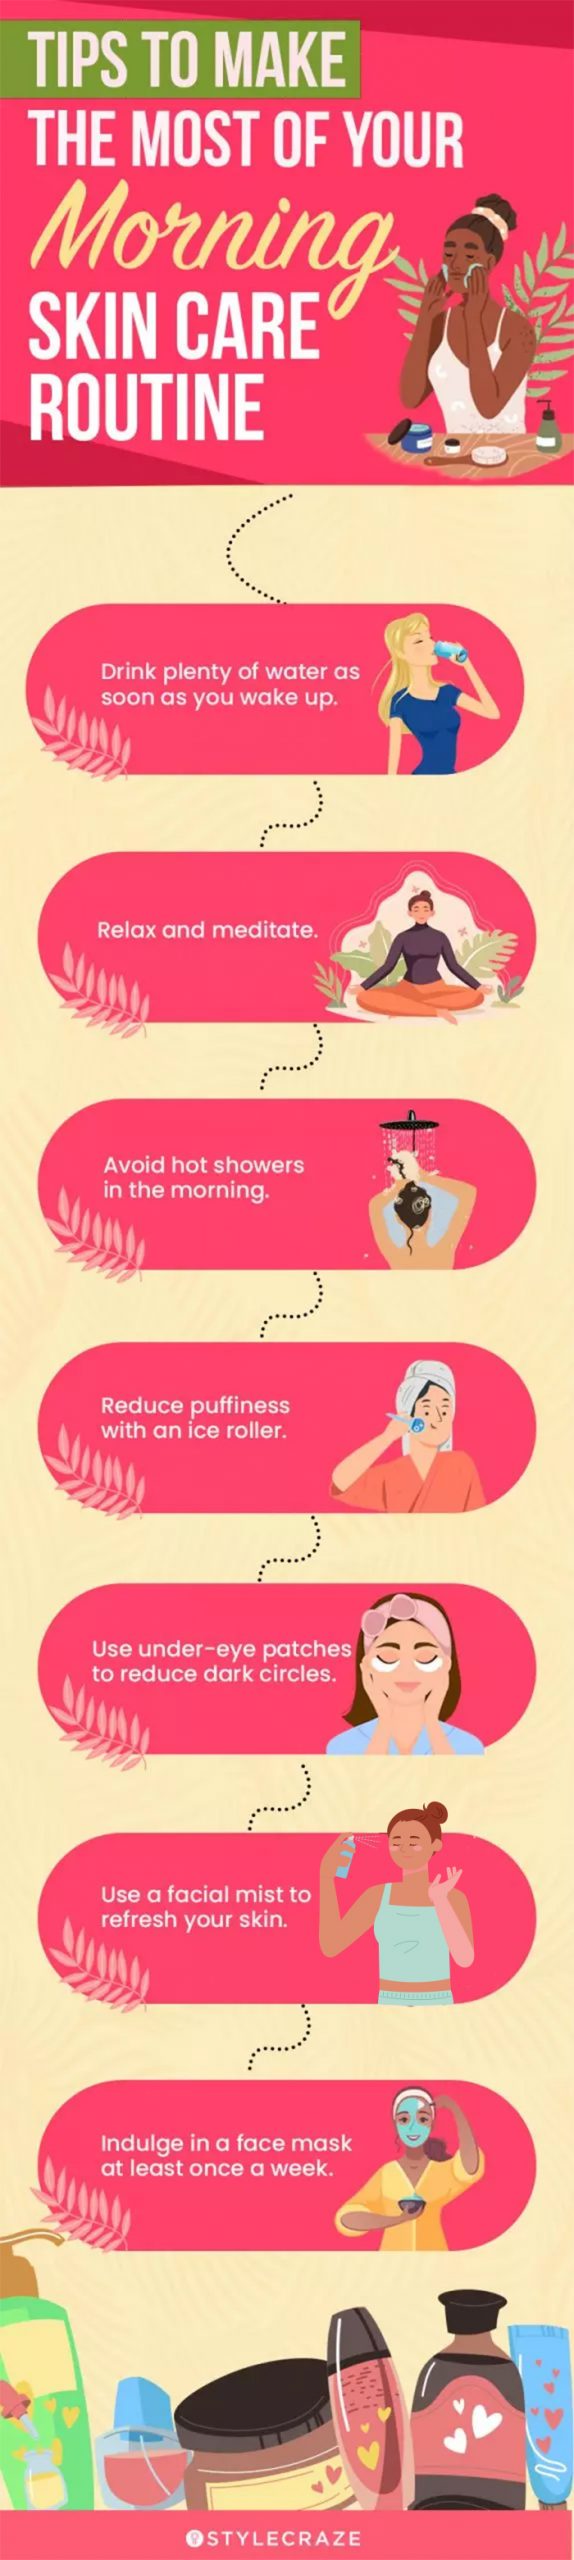 tips to make the most of your morning skin care routine (infographic)